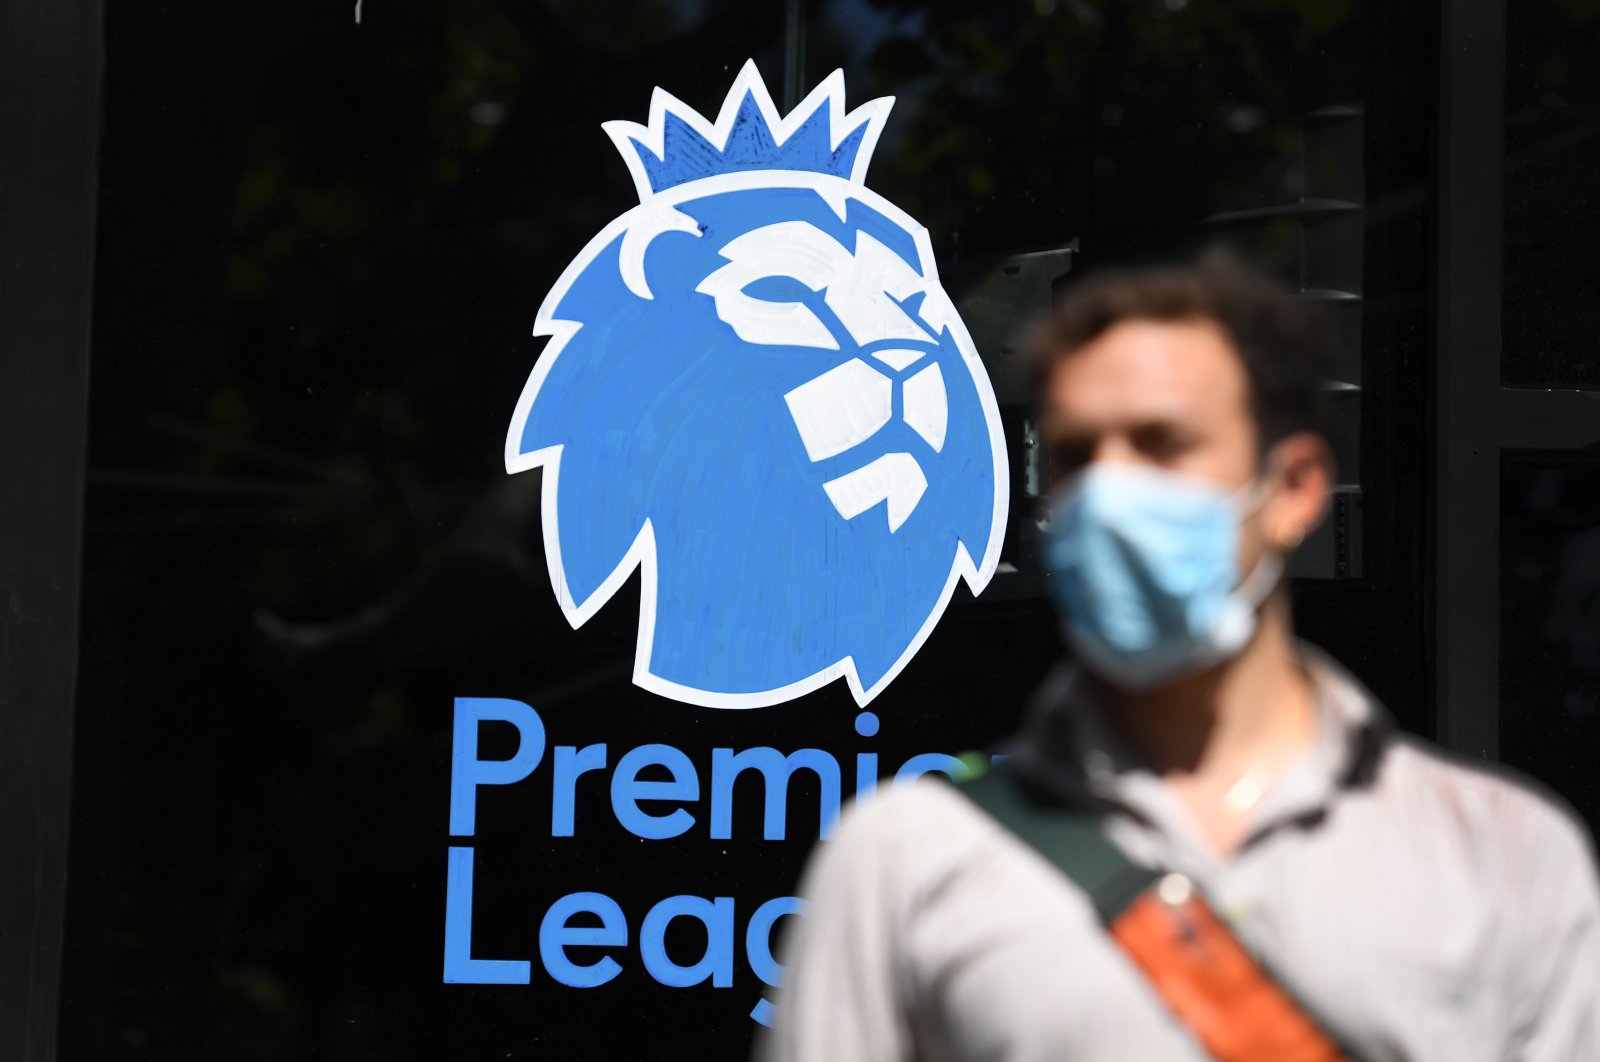 A man wearing a protective mask walks past the English Premier League logo in London, May 29, 2020. (EPA Photo)